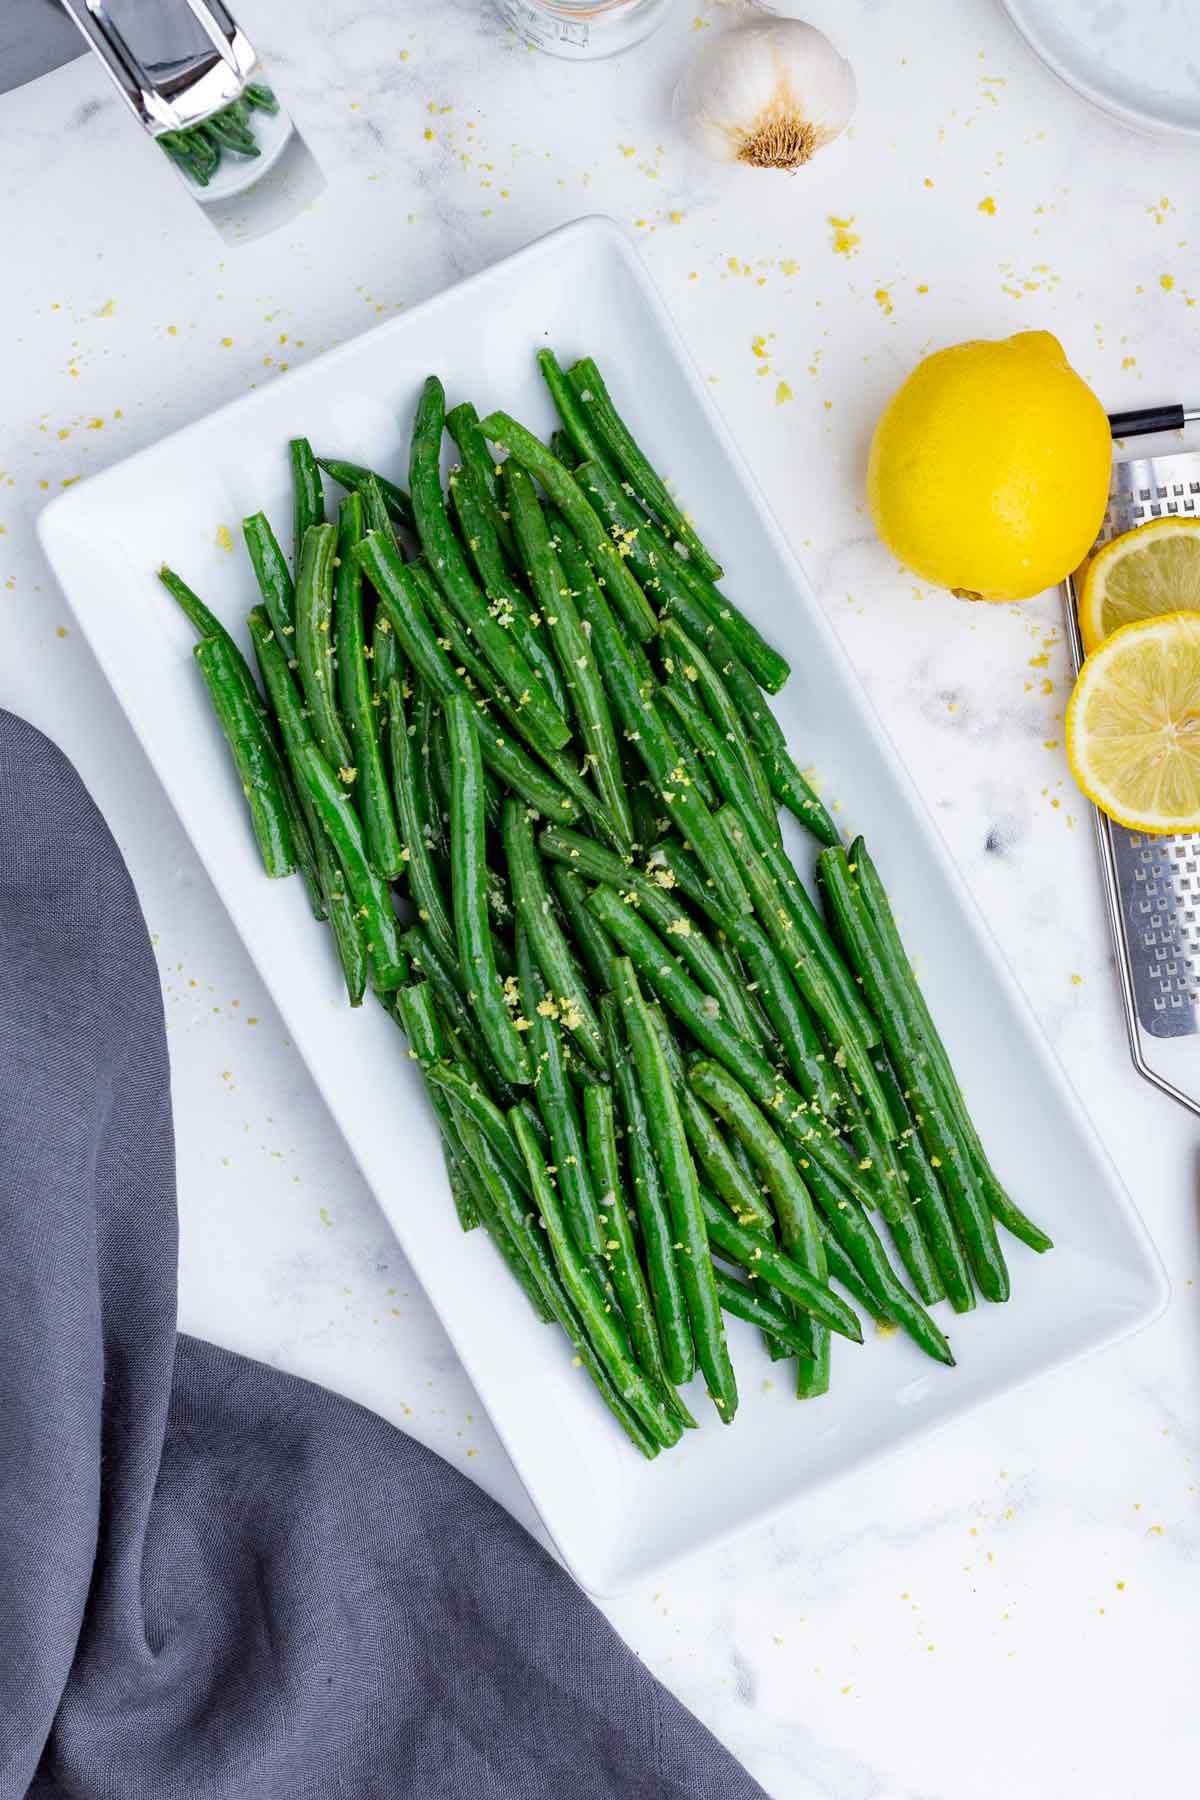 Green beans are served on a white plate after cooking in the air fryer.